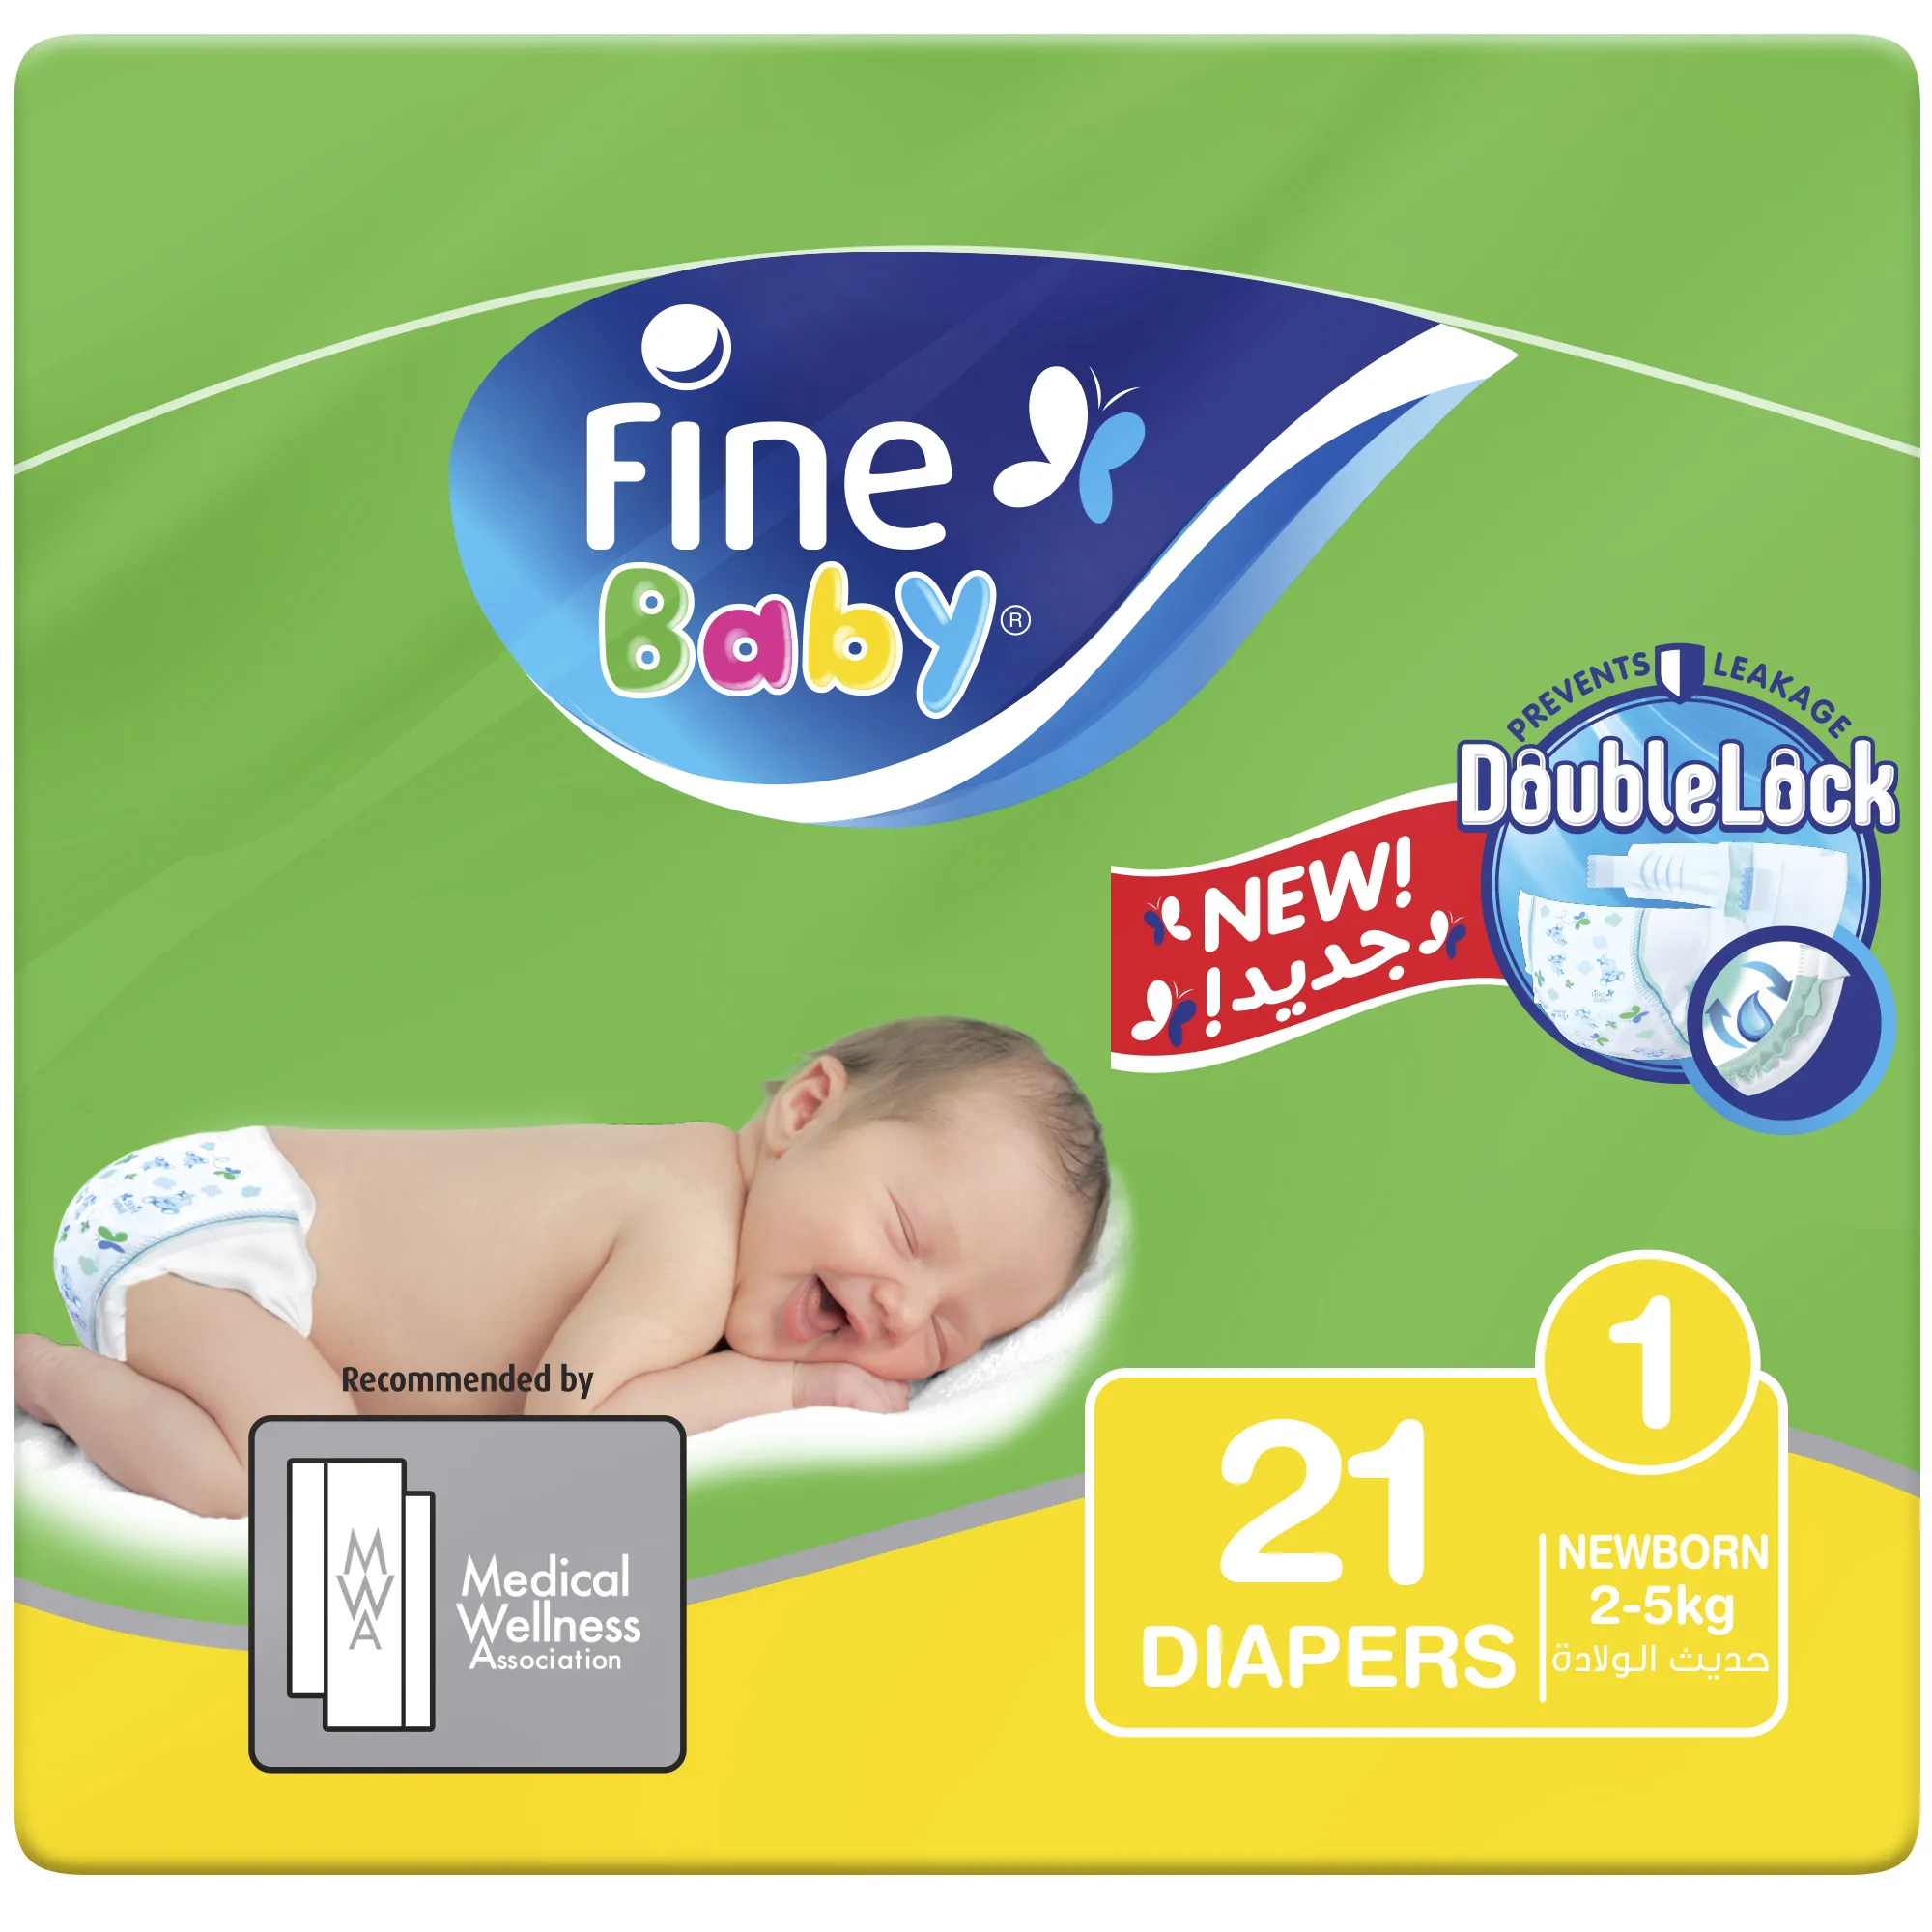 Fine Baby Diapers, Size 1, Newborn of 21 diapers